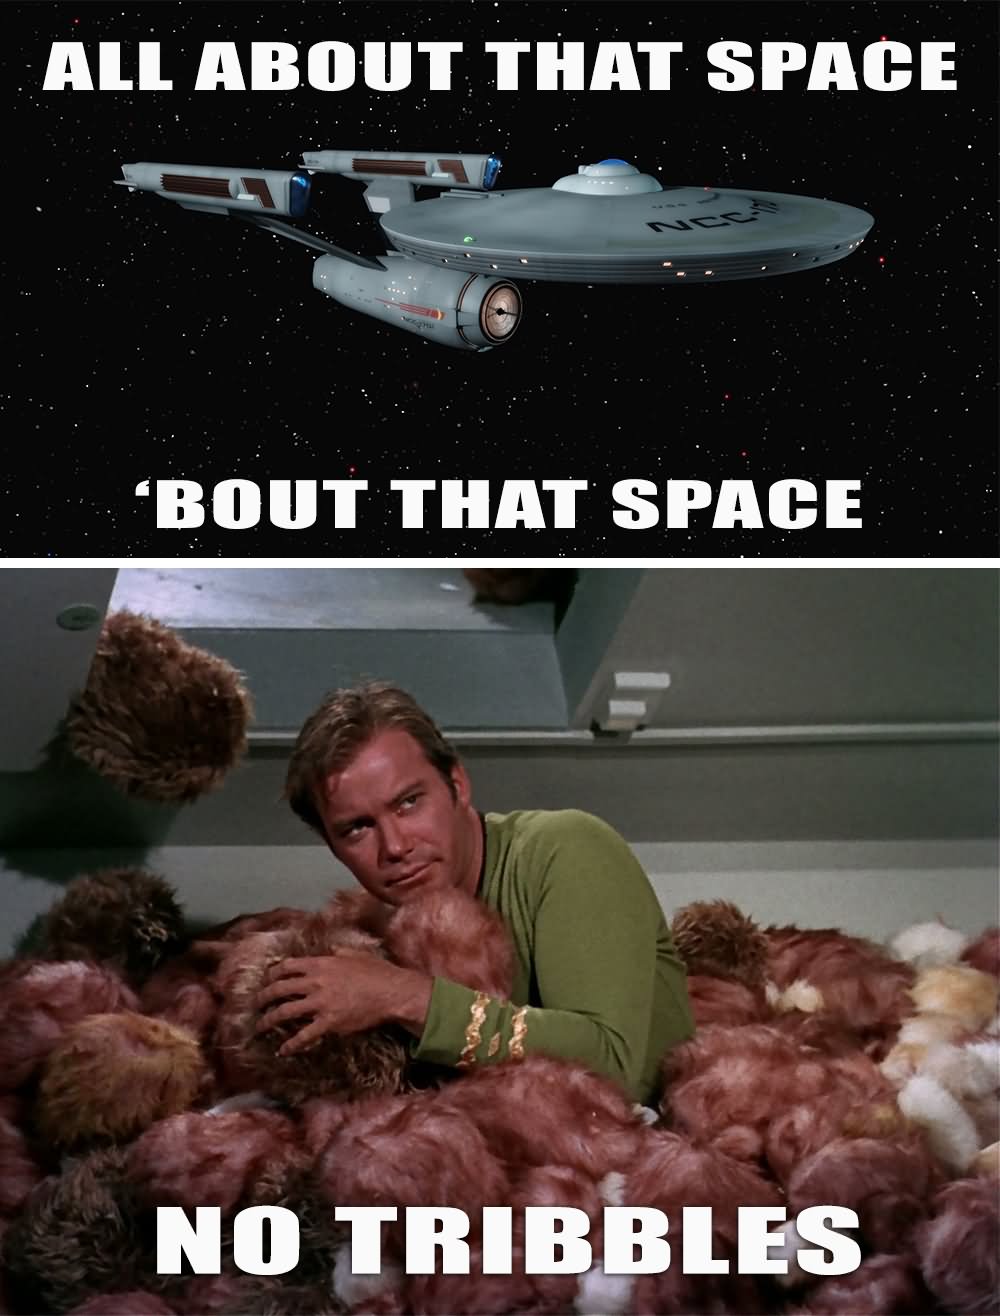 All About That Space Bout That Space Funny Space Meme Image